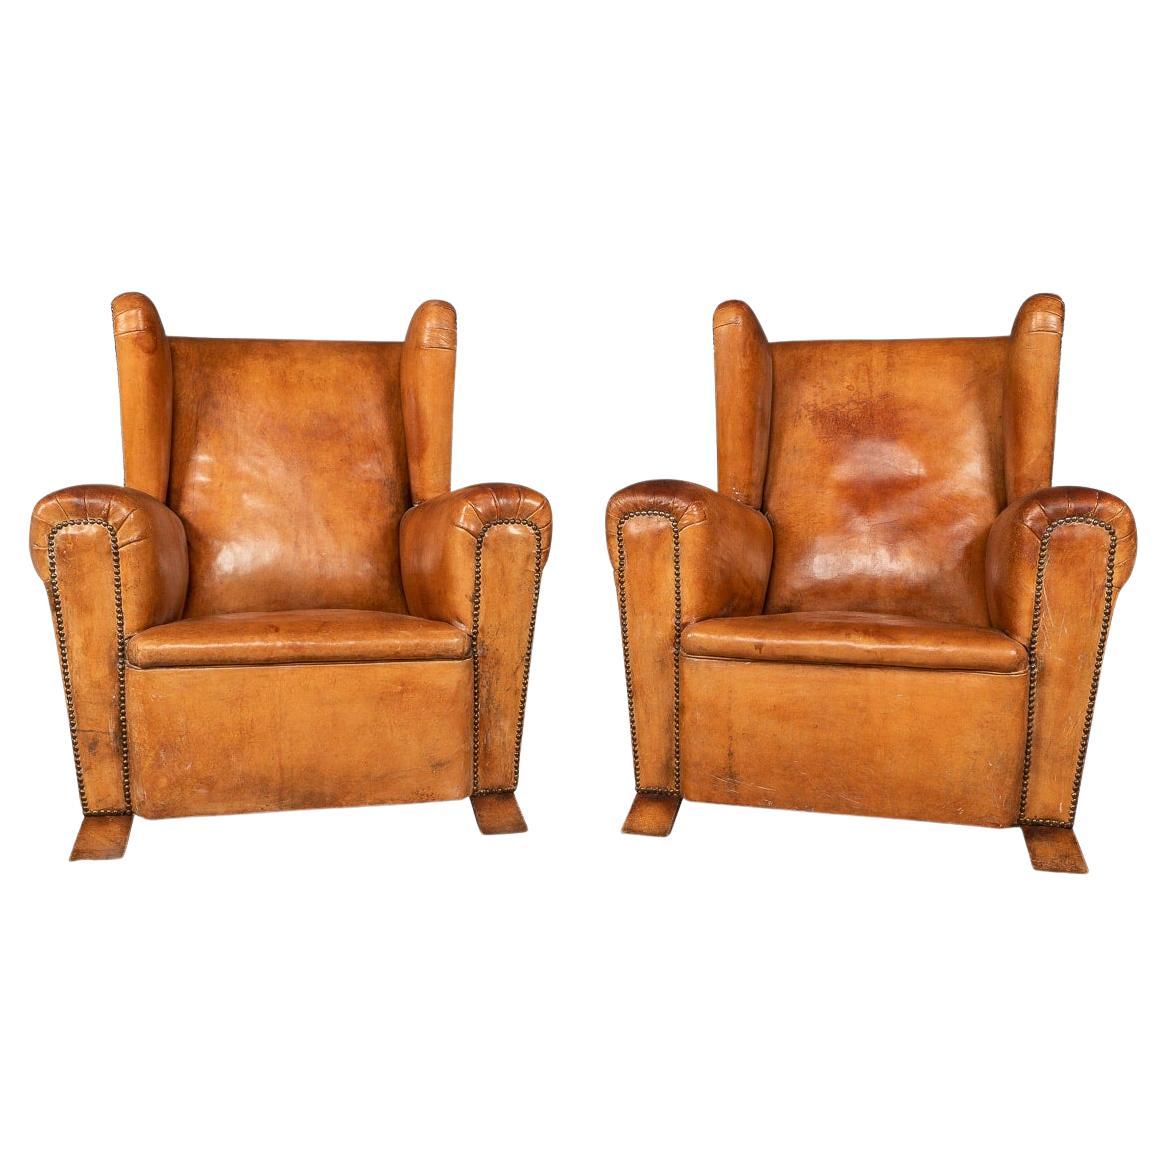 20th Century Pair of Dutch Sheepskin Leather Wingback Chairs